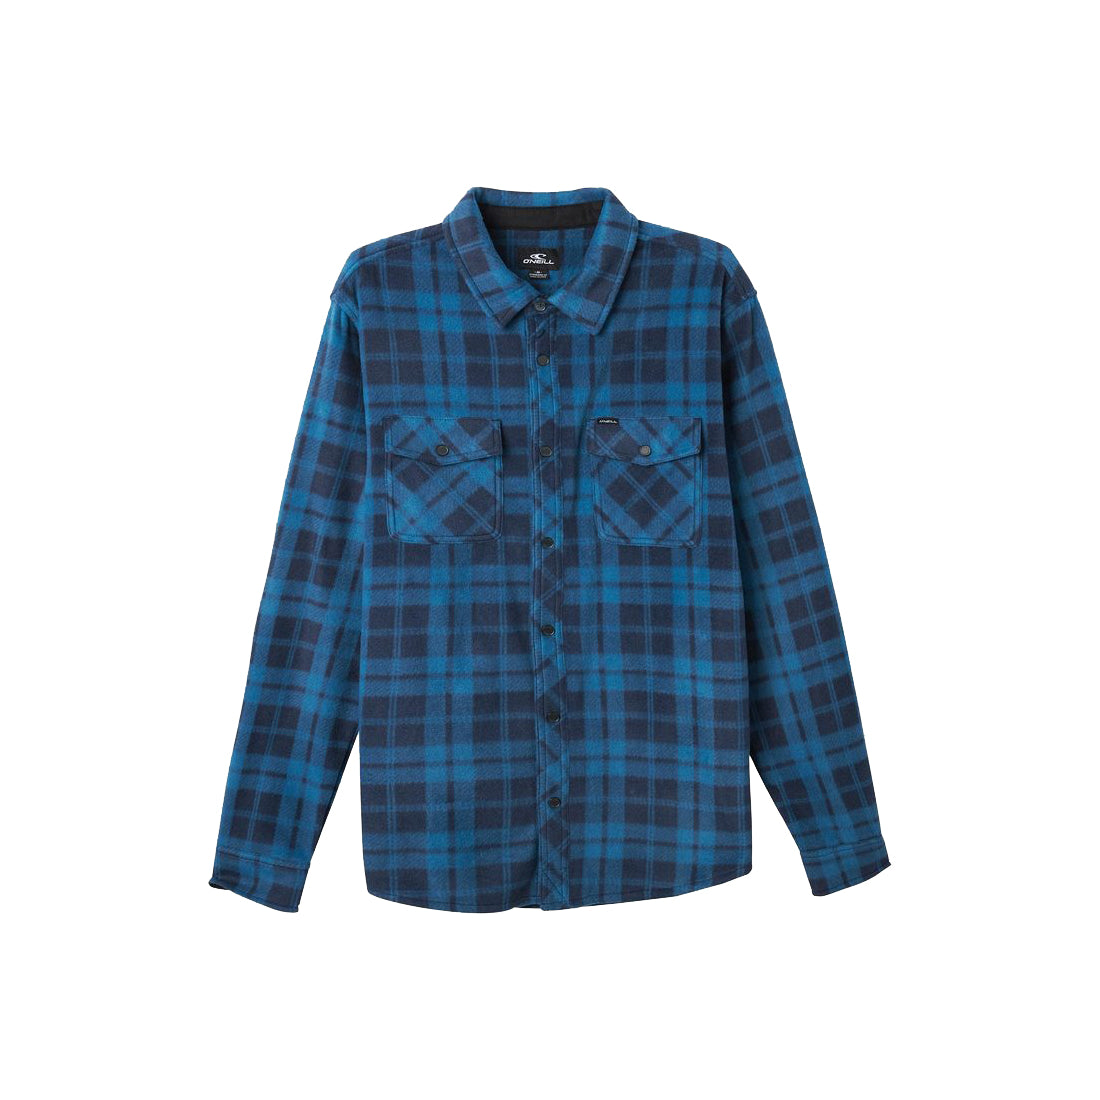 Oneill Glacier Plaid LS Woven NVY2 S